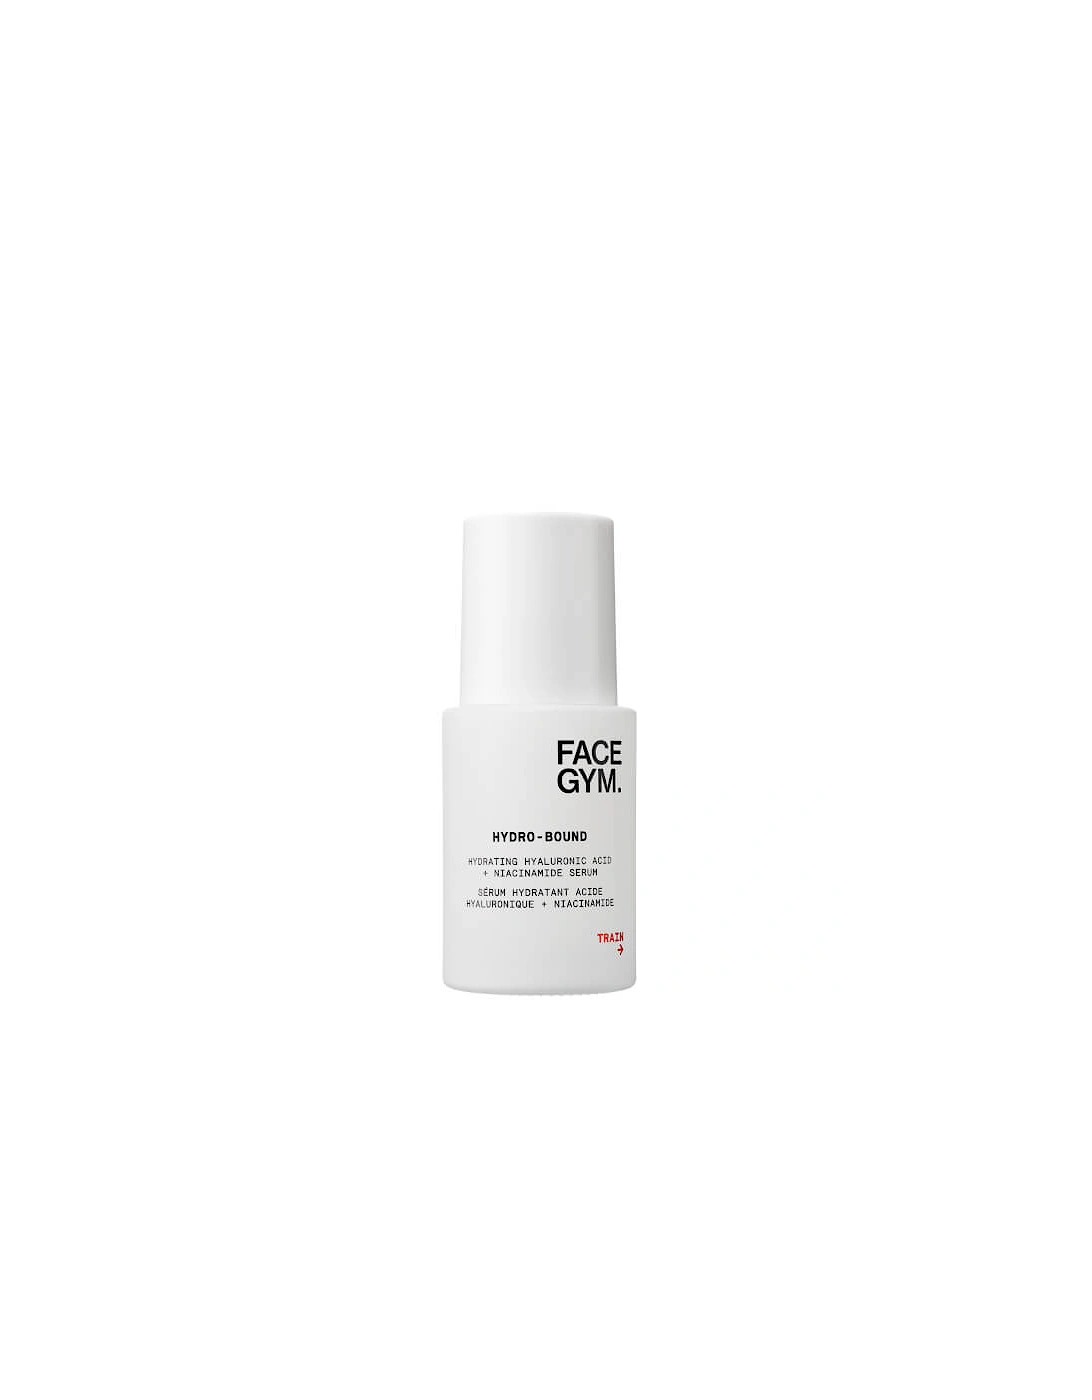 Hydro-Bound Hydrating Hyaluronic Acid and Niacinamide Serum 30ml - FaceGym, 2 of 1